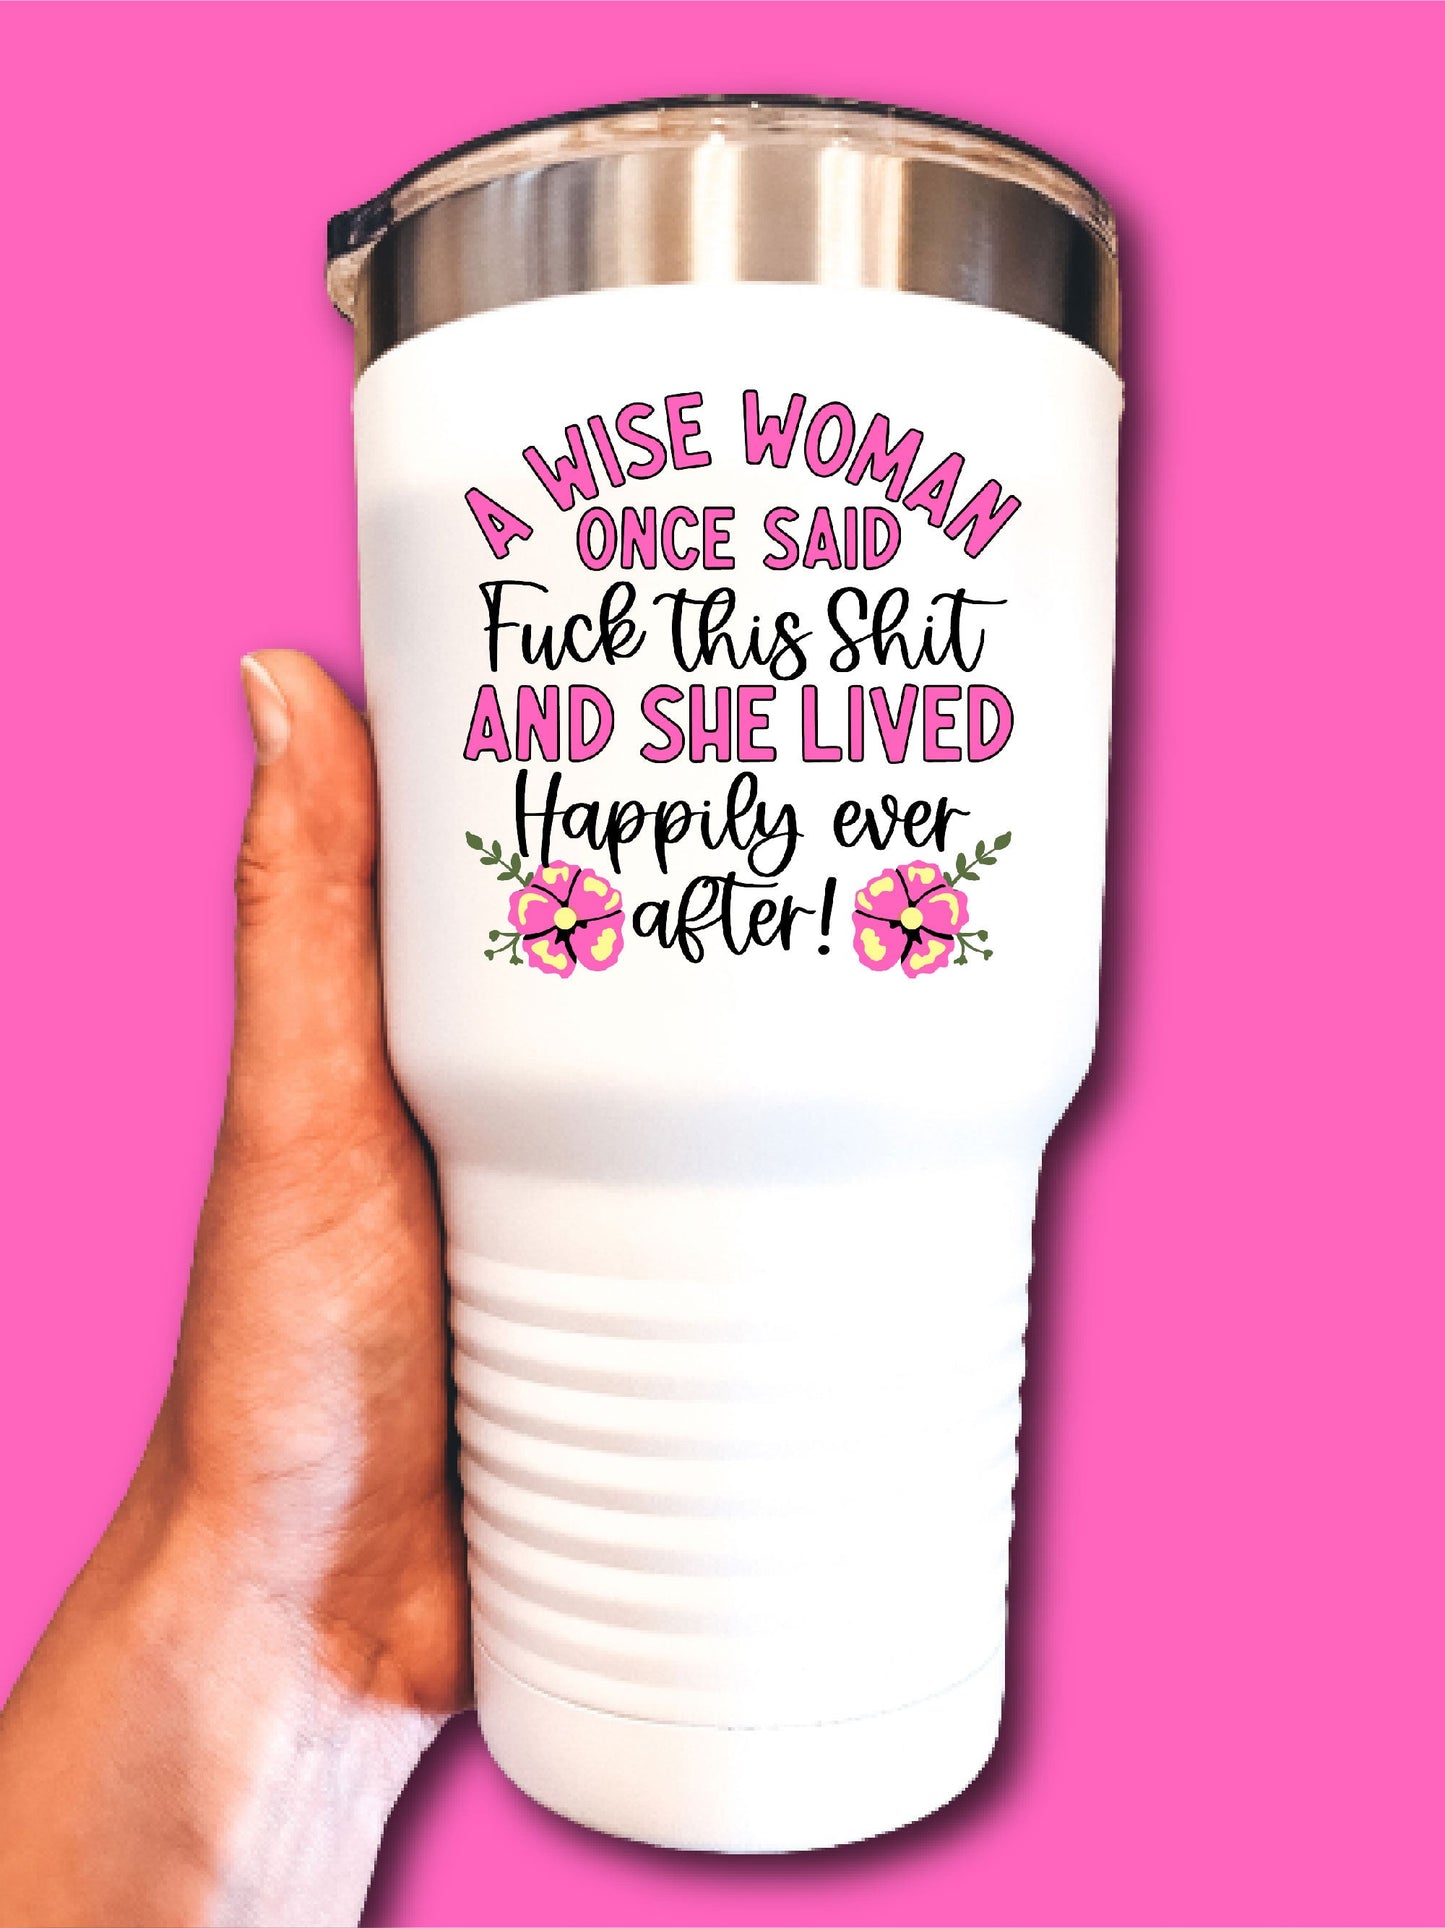 A Wise Woman Once Said F--k This S--t And She Lived Happily Ever After! (NEW) - UV TUMBLER